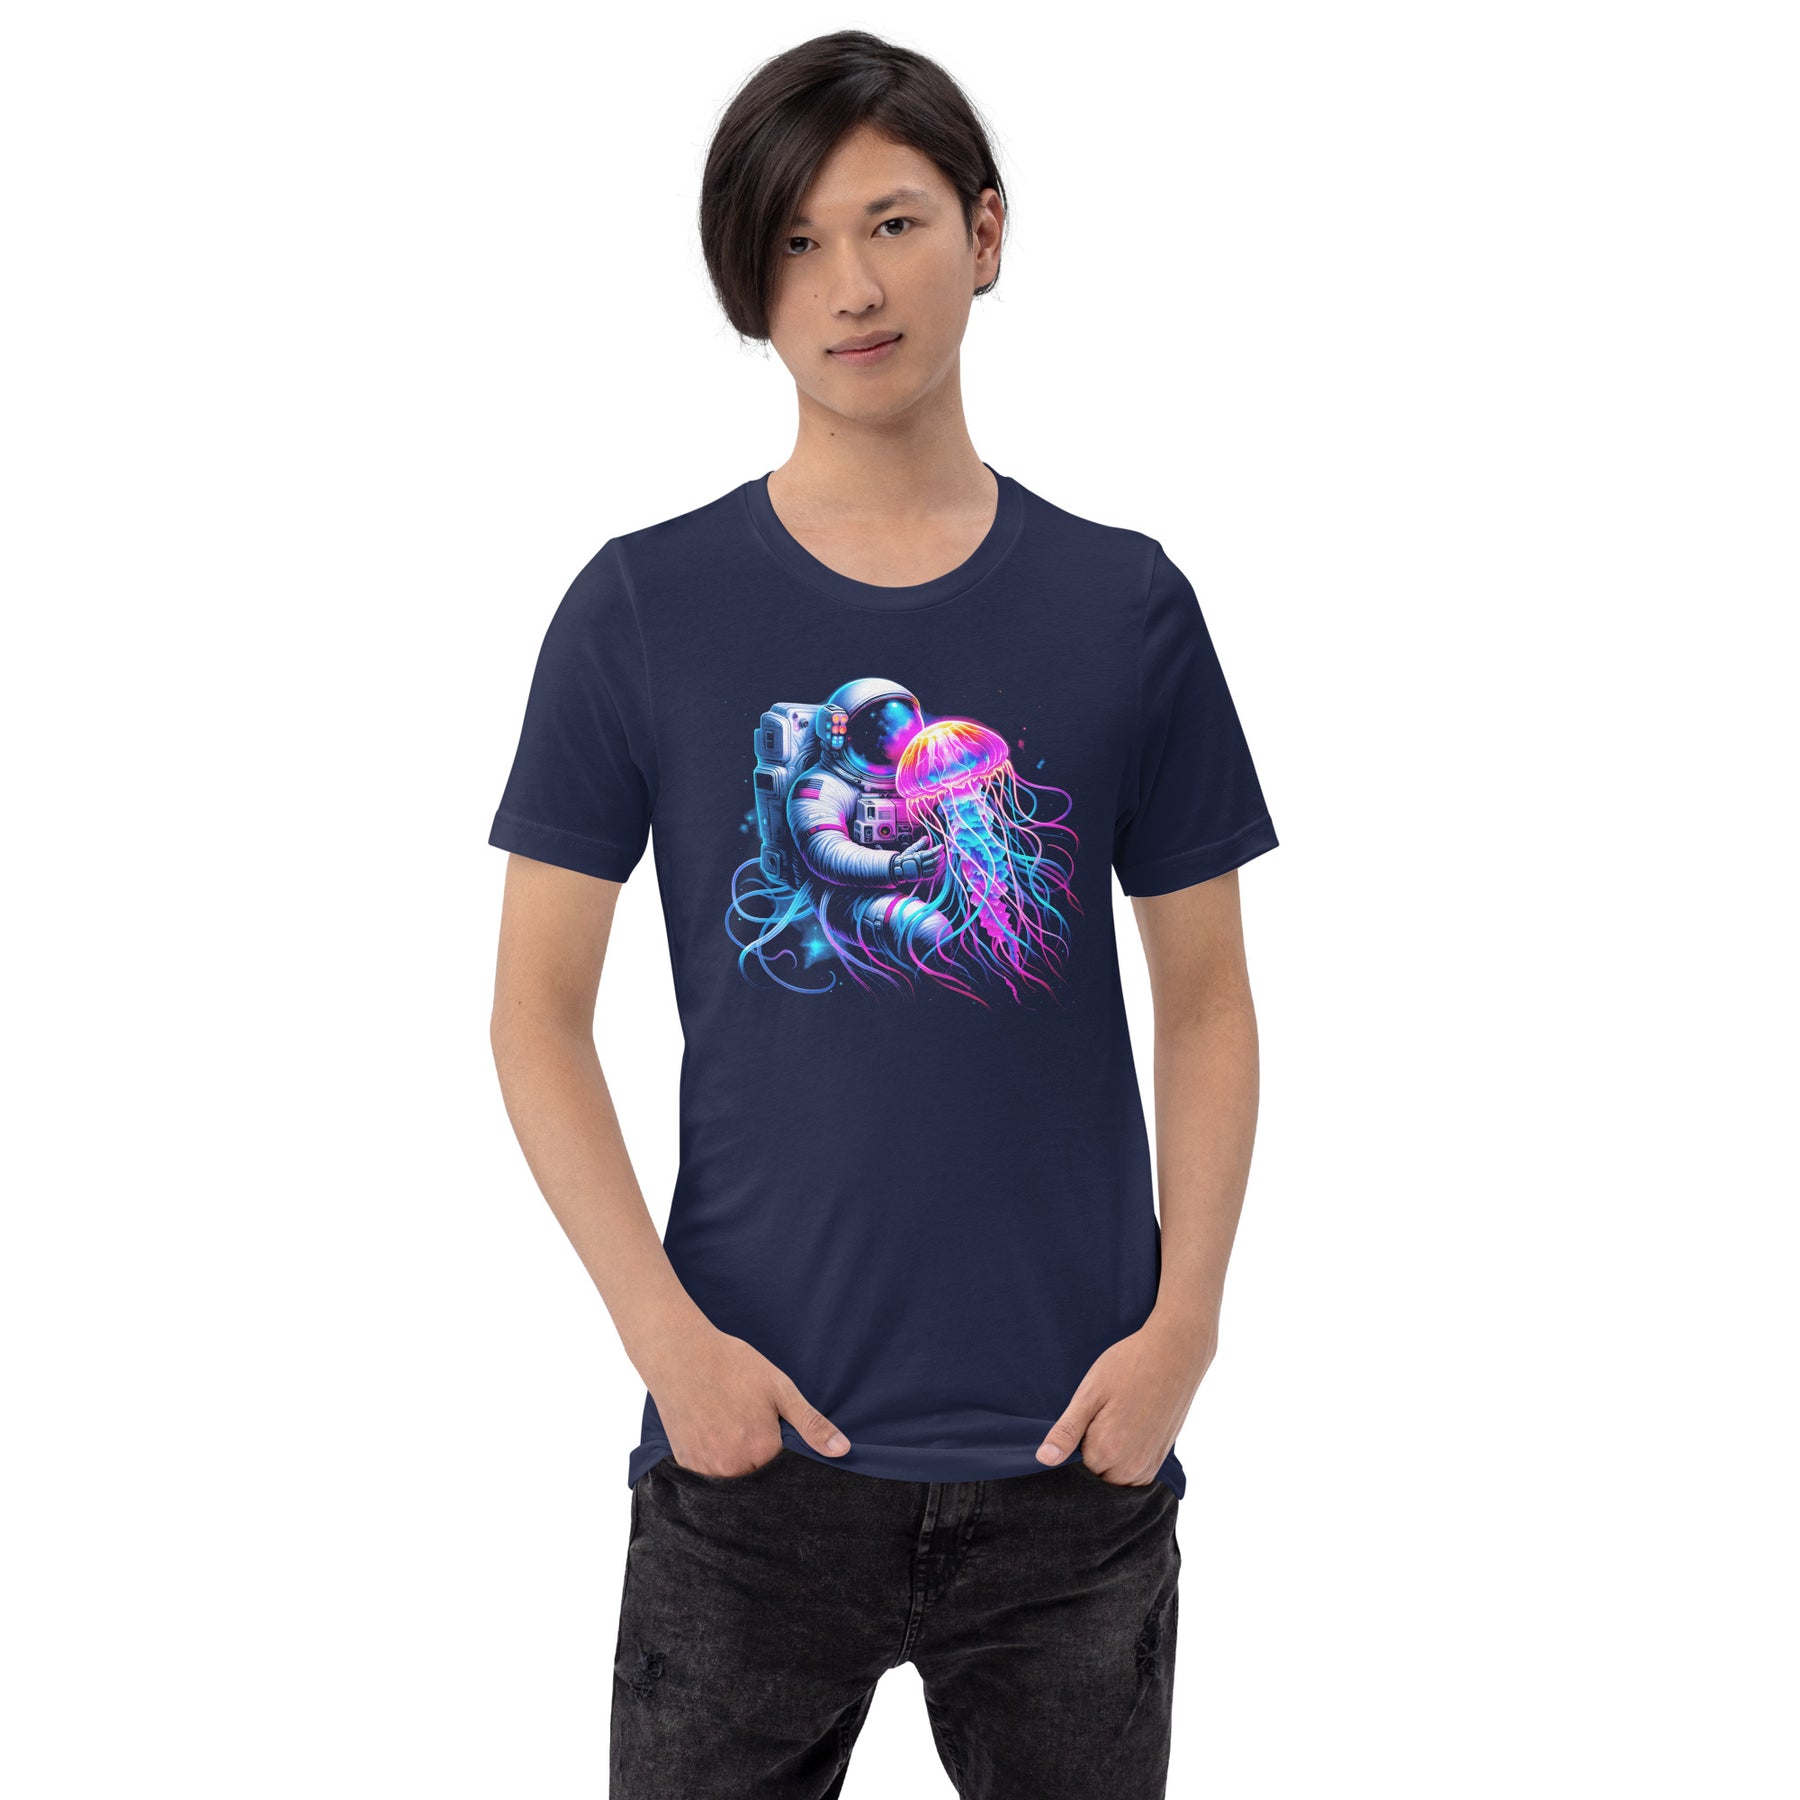 Space Astronaut Shirt, Spaceman Jellyfish Tee, Galaxy Exploration, Astronomy Lovers Gift, Cool Outer Space